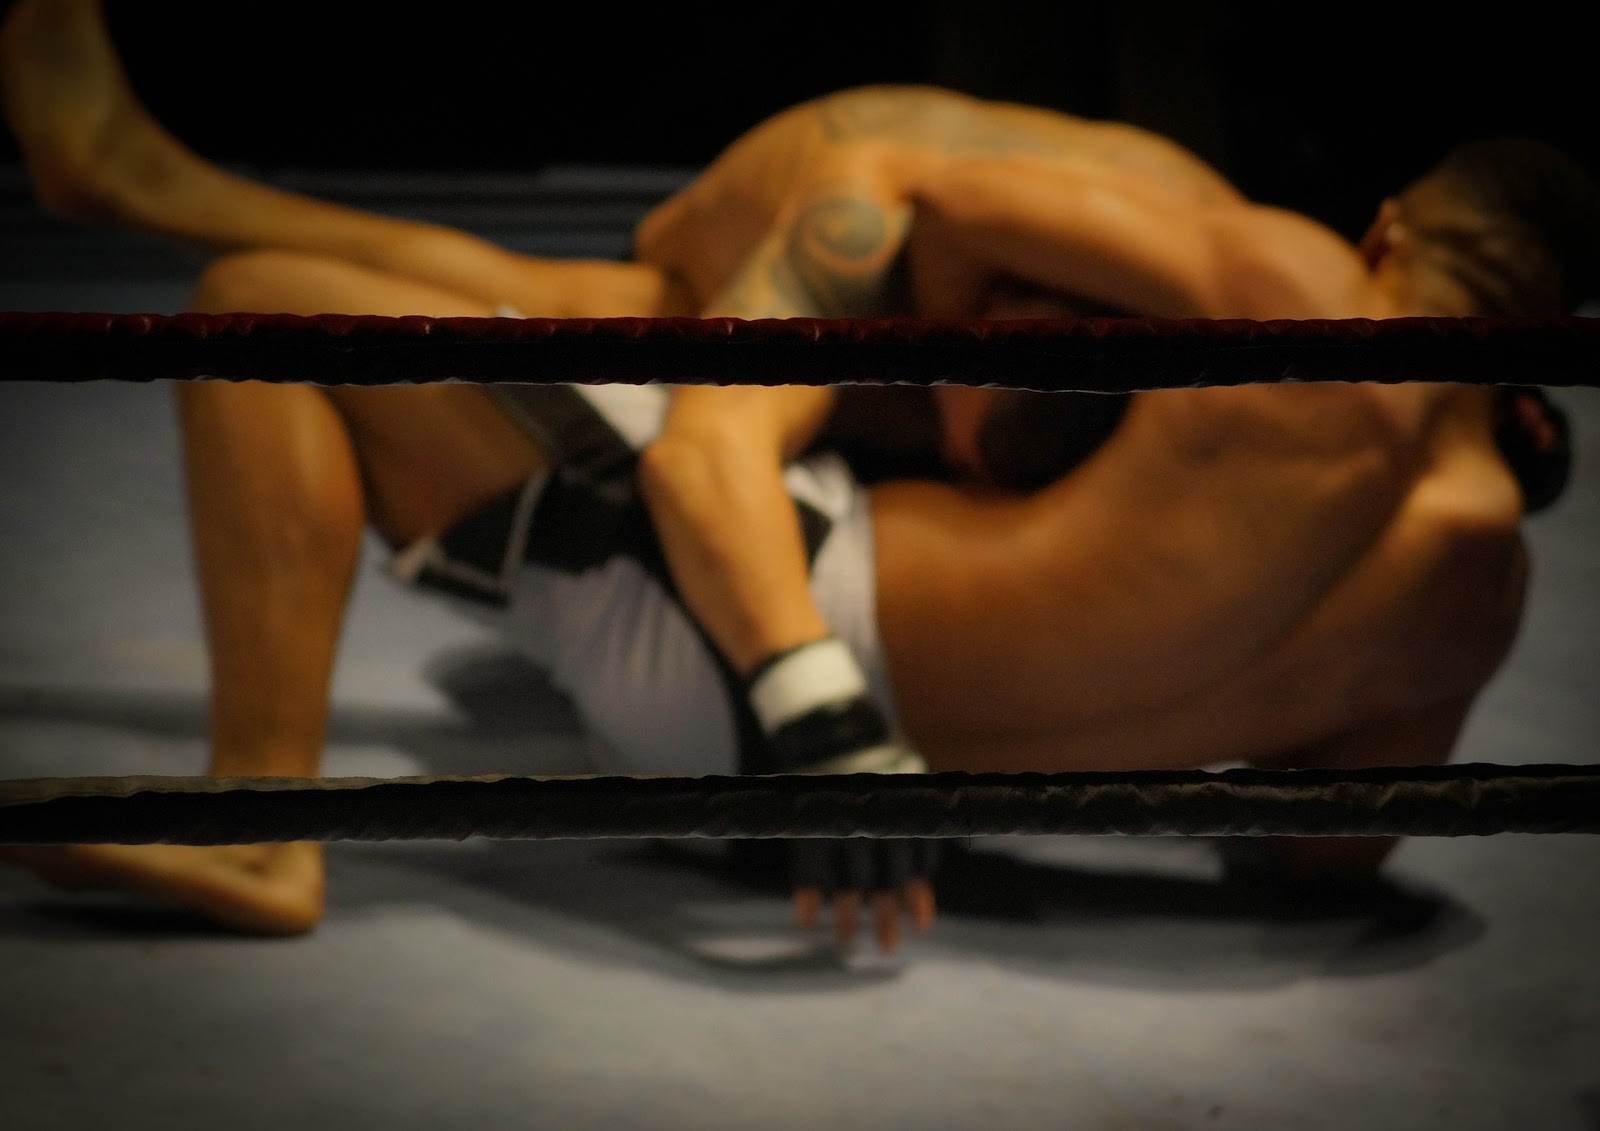 Bjj vs muay thai: Which Is Better for MMA?